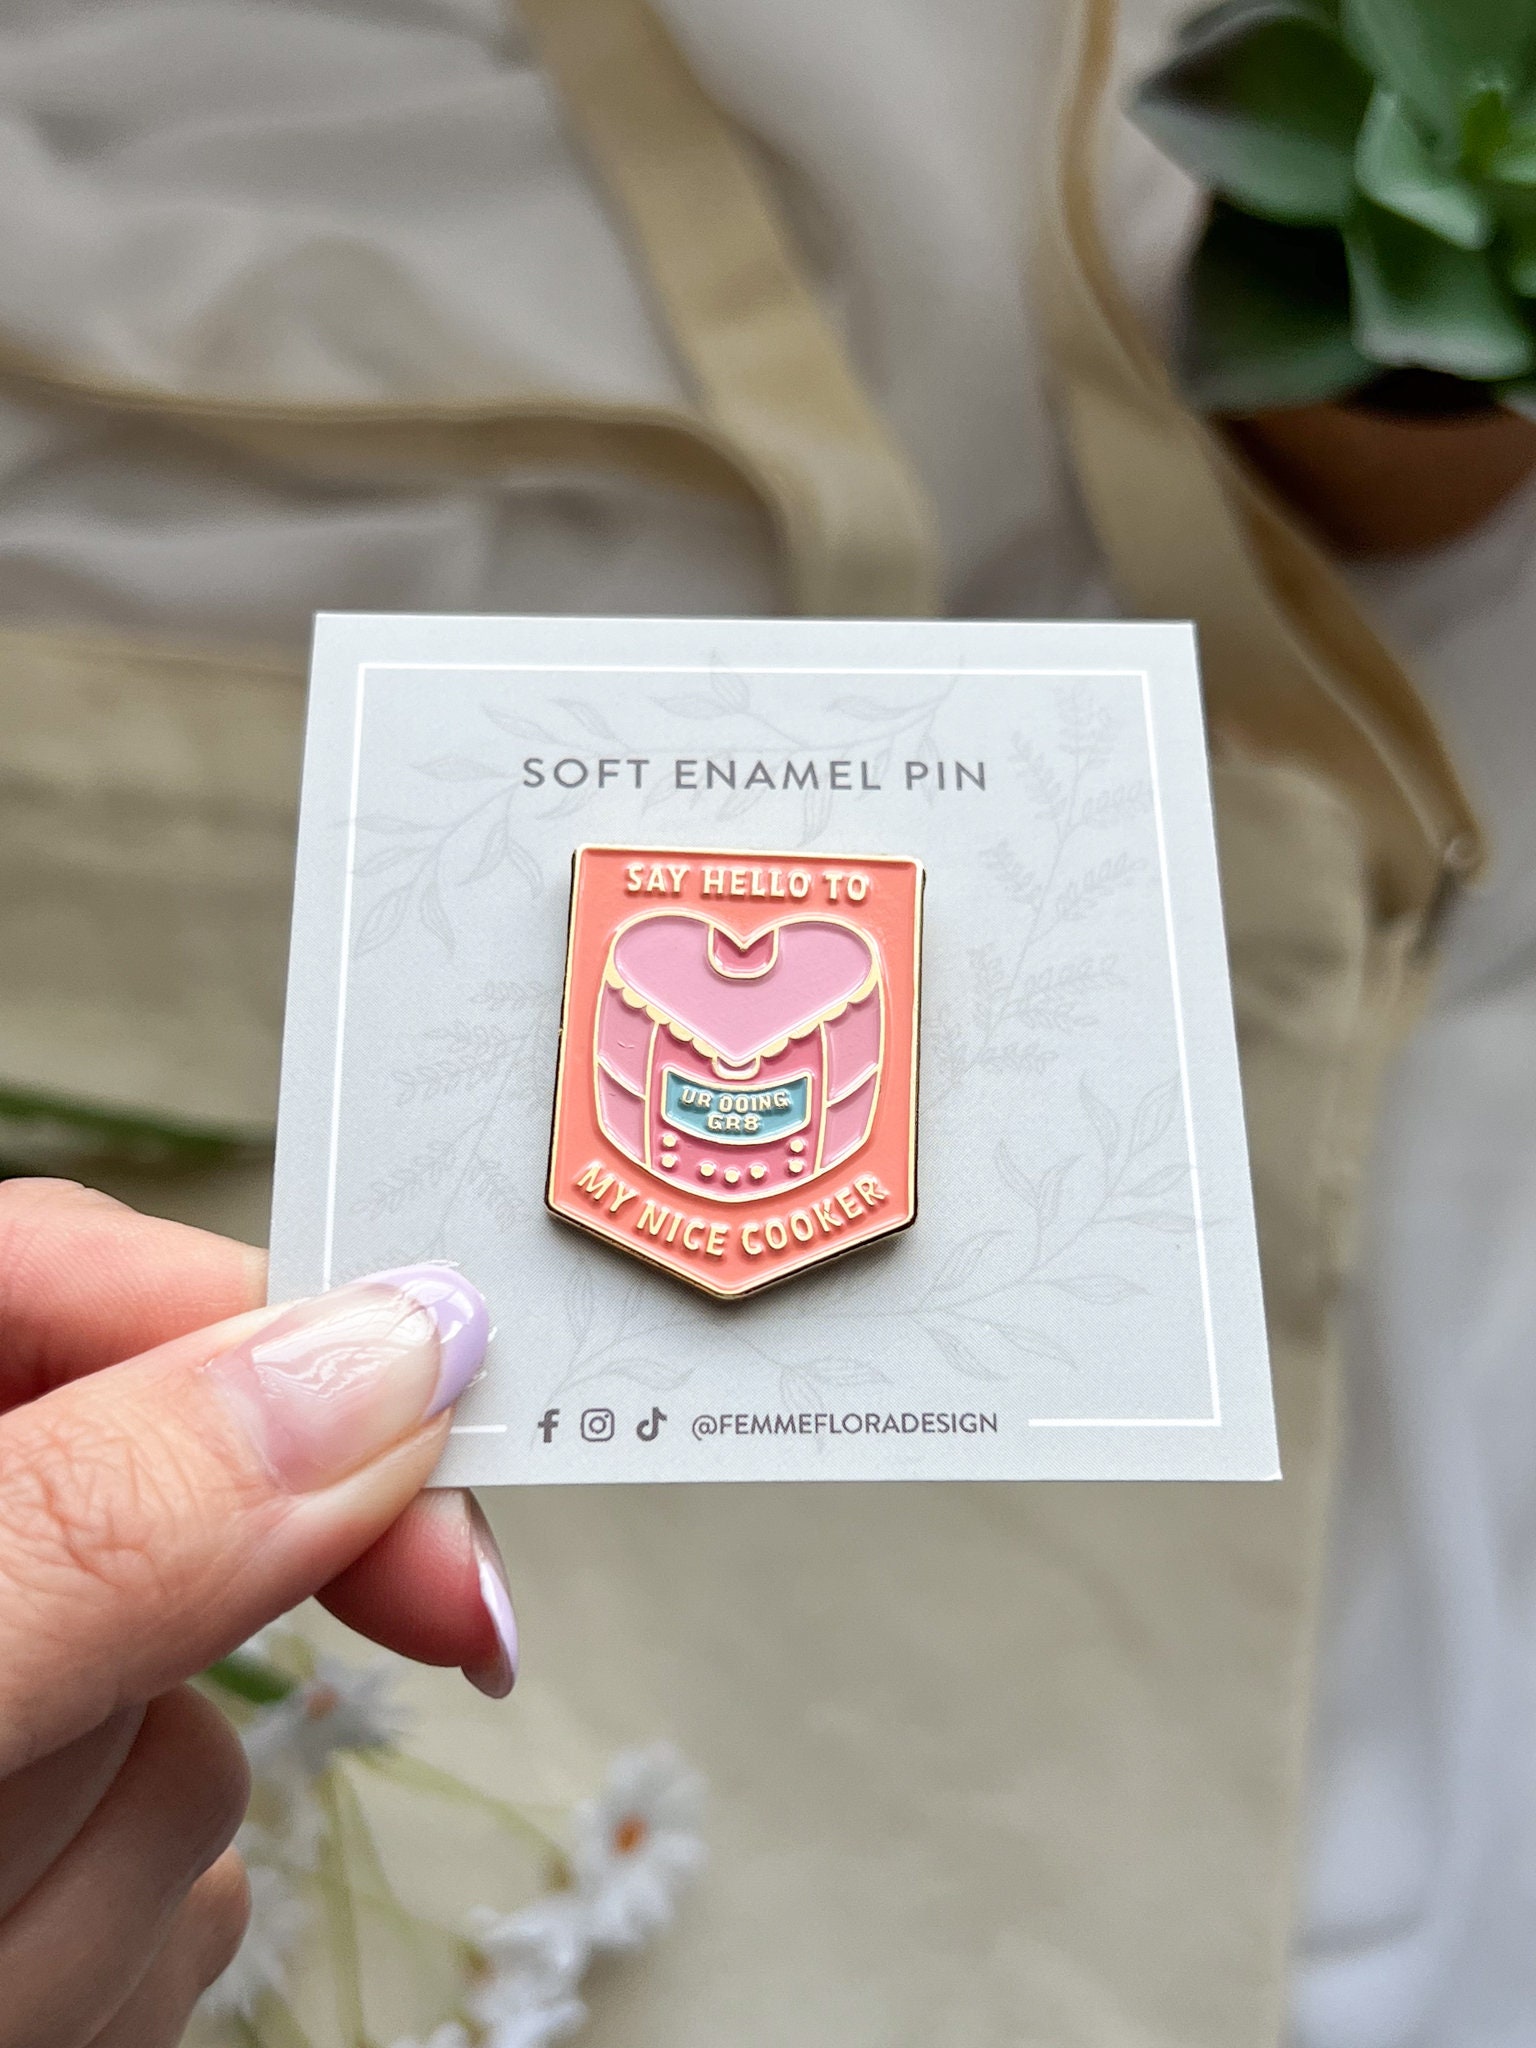 Say Hello to My Nice Cooker ur Doing Gr8 Japanese Heart-shaped Rice Cooker  Pink Pastel Soft Enamel Pin 